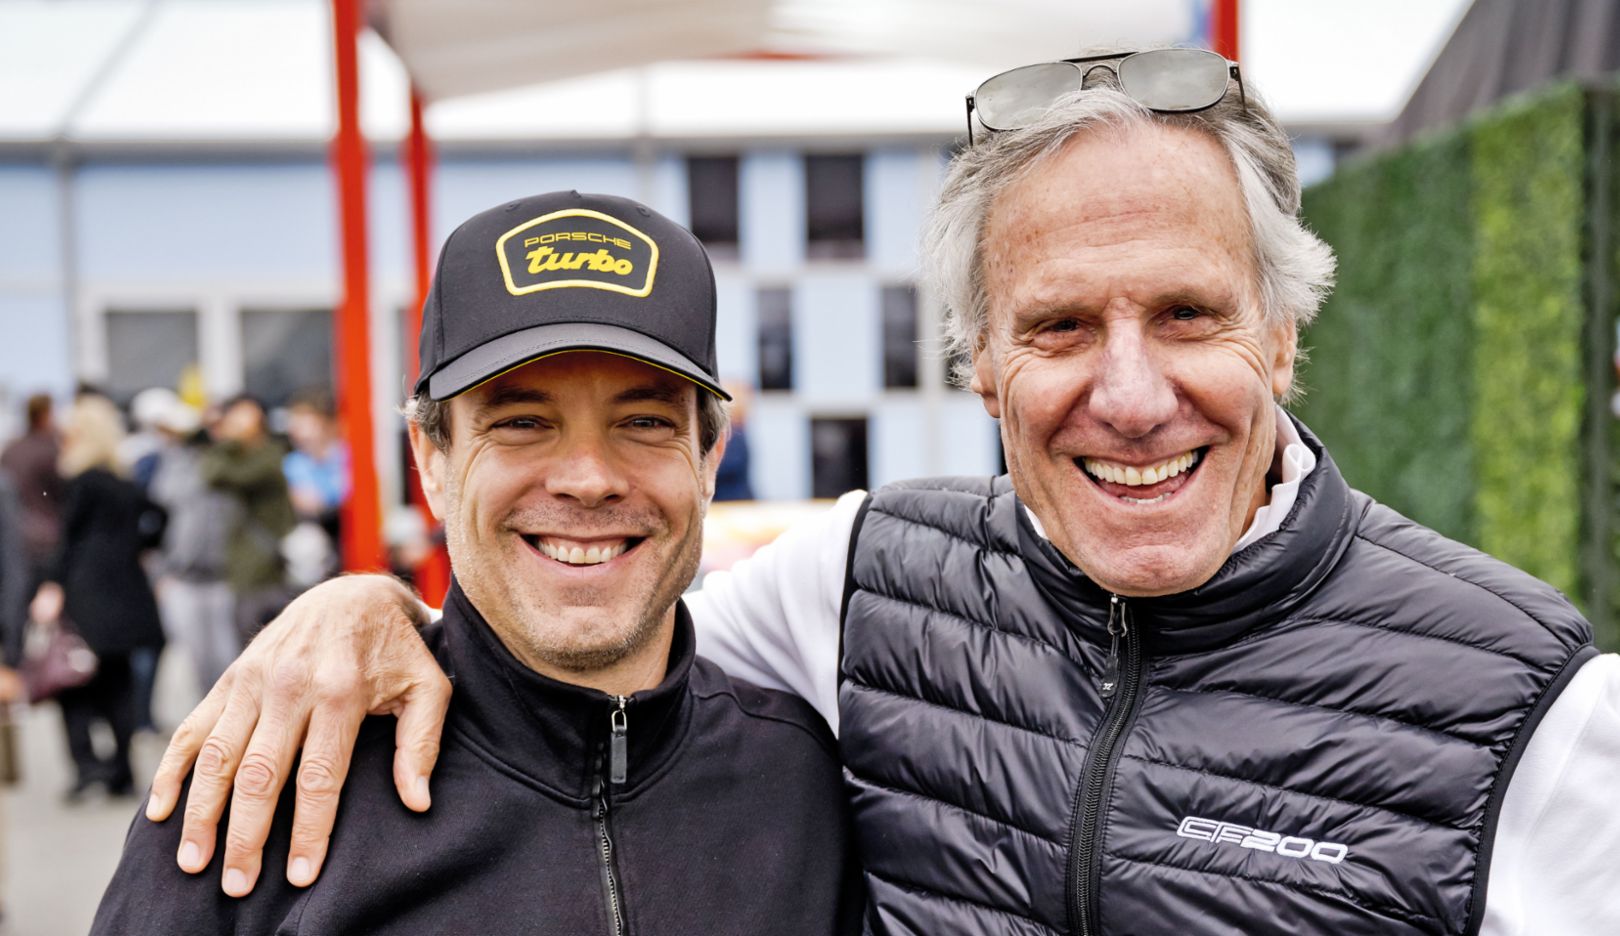 “We brought five cars to the racetrack. This is also a personal family event for us. It’s particularly wonderful when father and son share the same passion.” Evan and Bruce Meyer